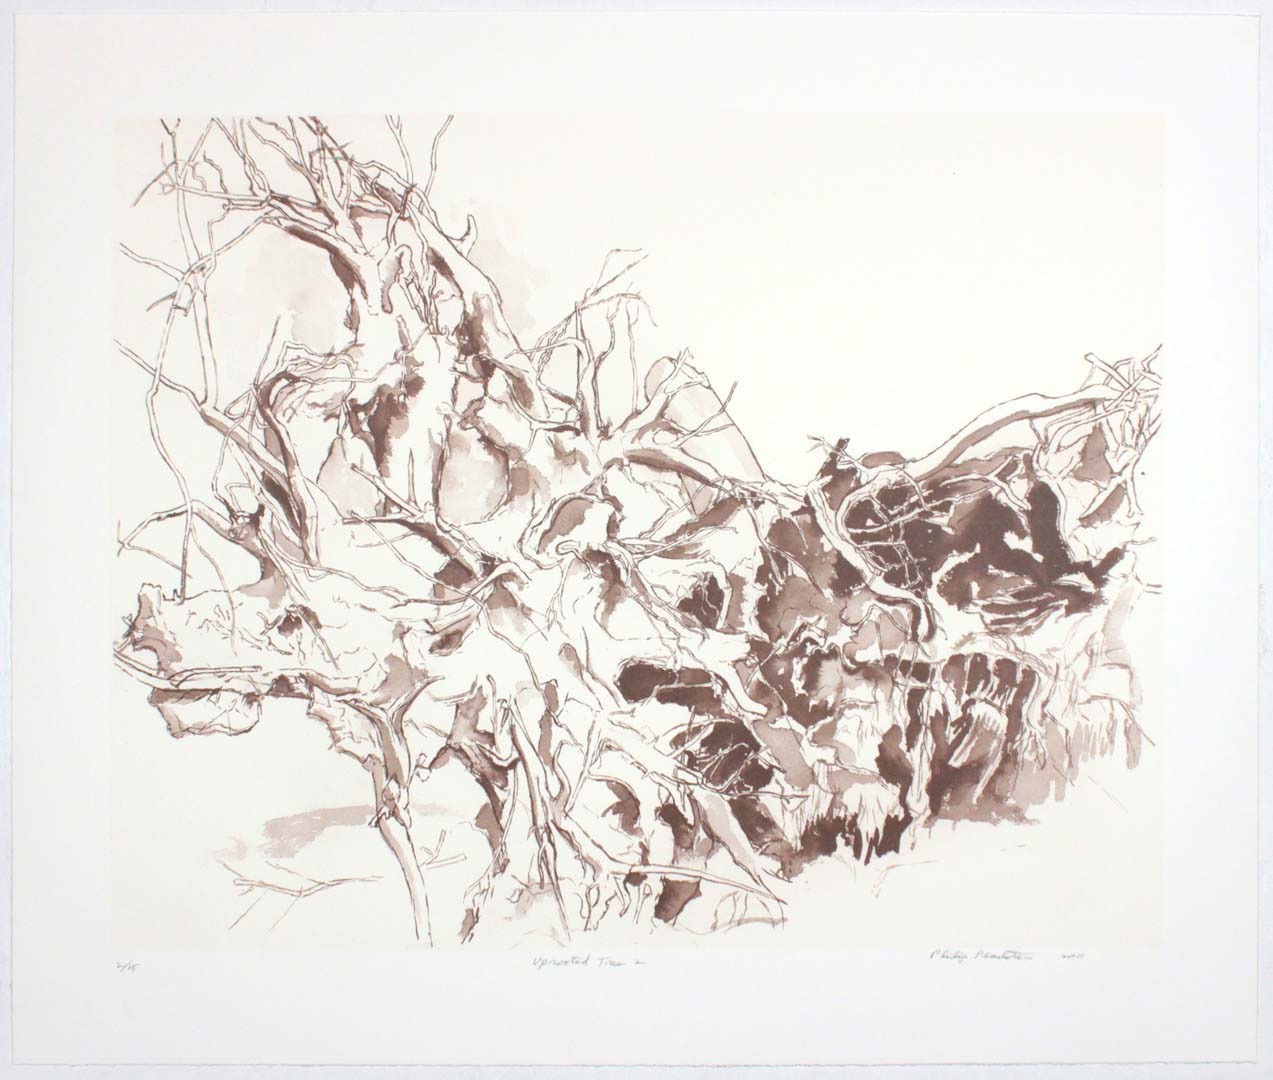 2011 Uprooted Tree #2 Lithograph on Paper 20.625 x 24.625